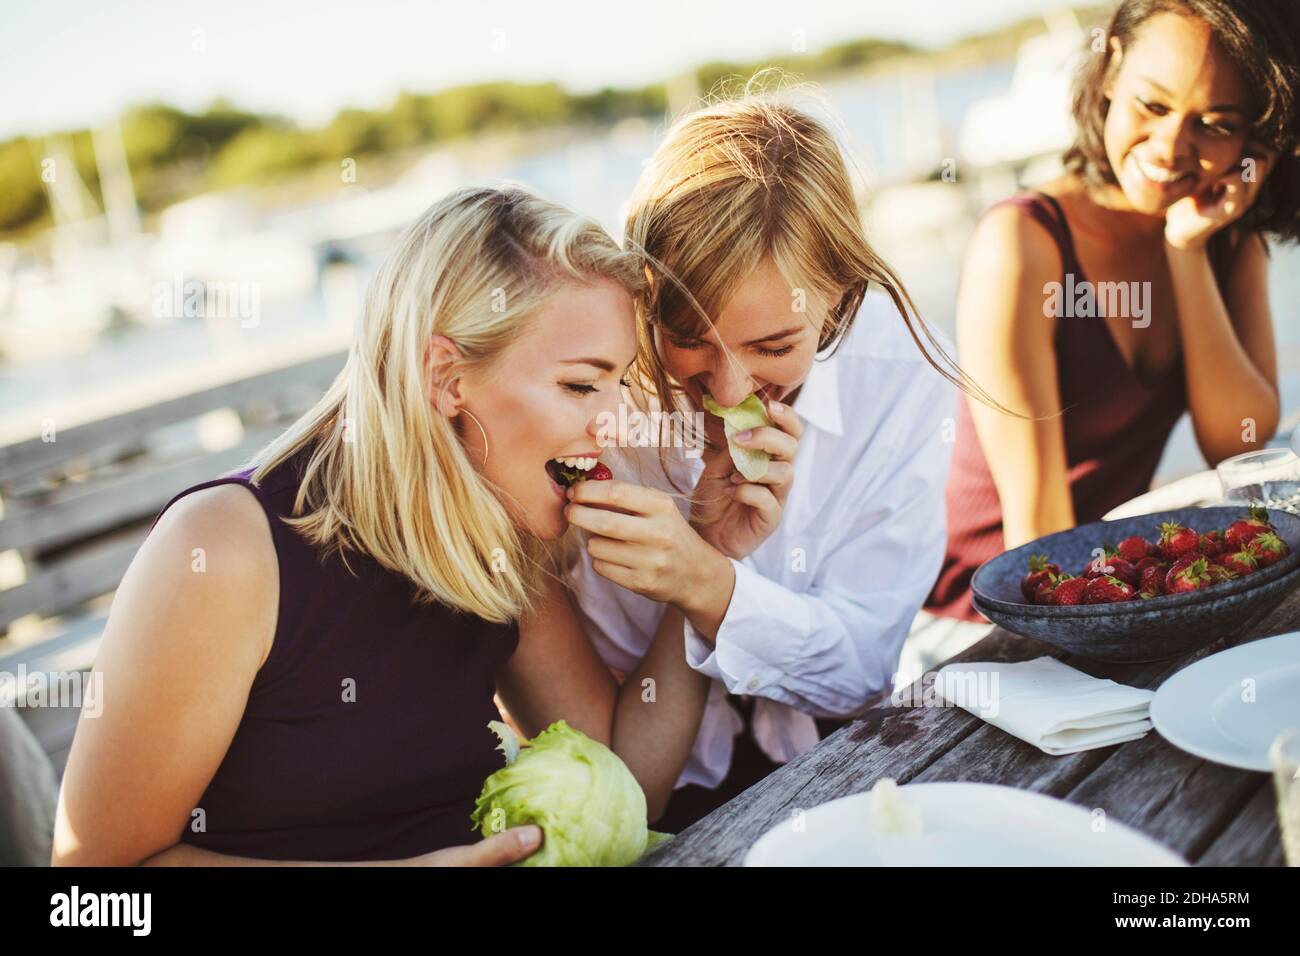 Young woman looking at cheerful blond friends sharing cabbage at picnic table Stock Photo